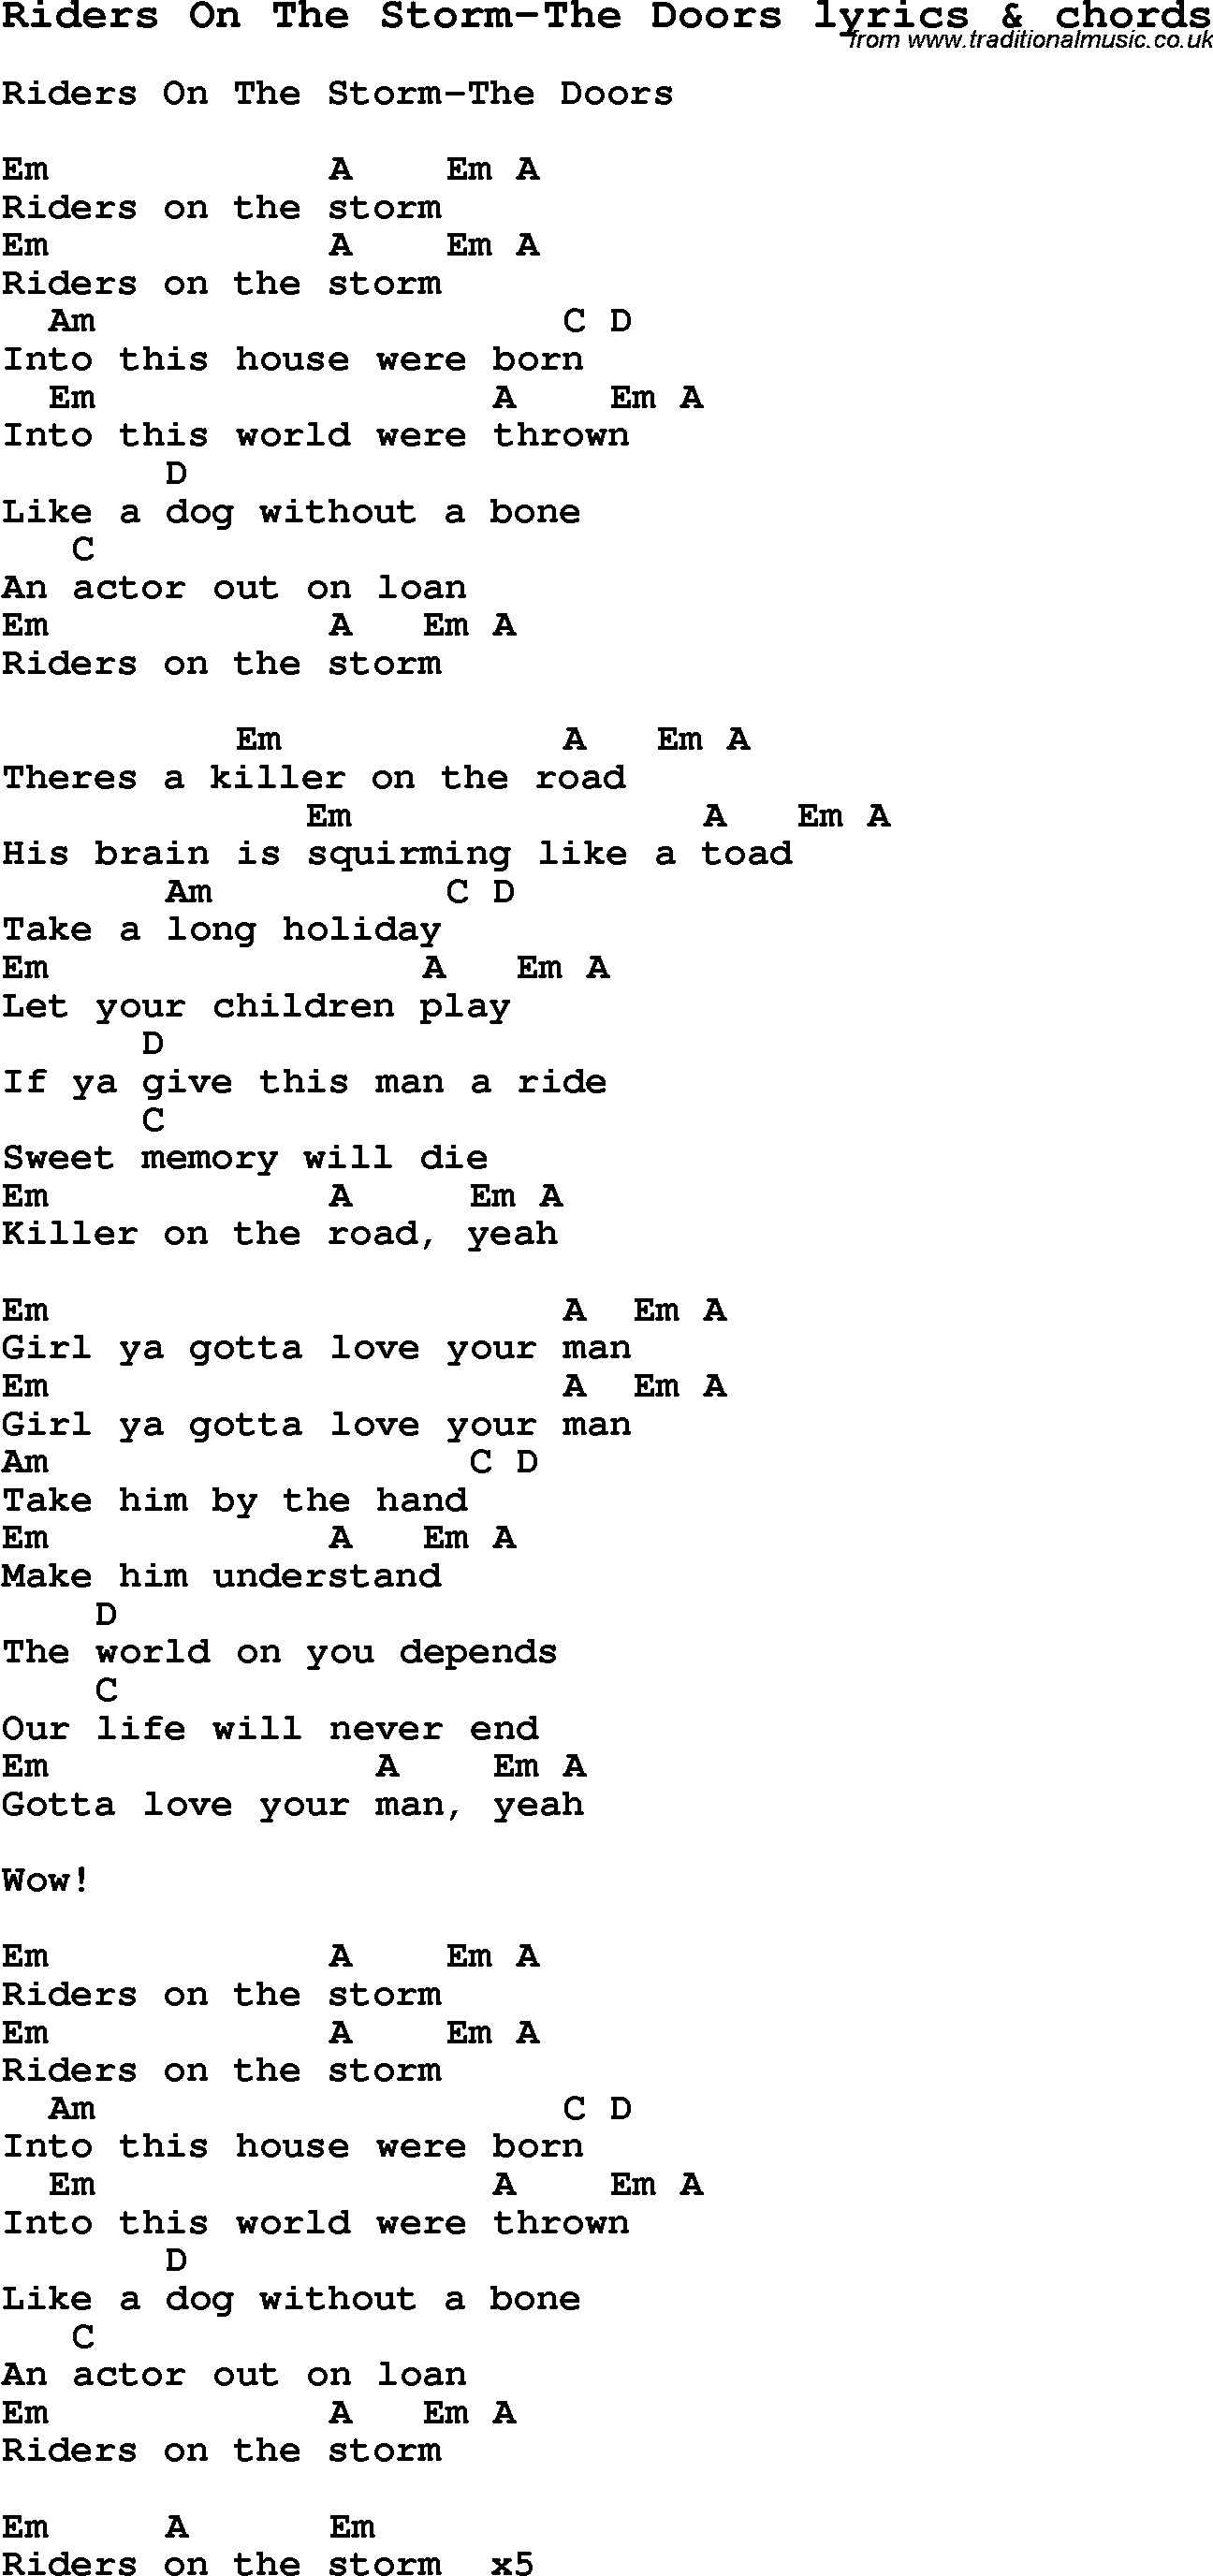 Love Song Lyrics for: Riders On The Storm-The Doors with chords for Ukulele, Guitar Banjo etc.